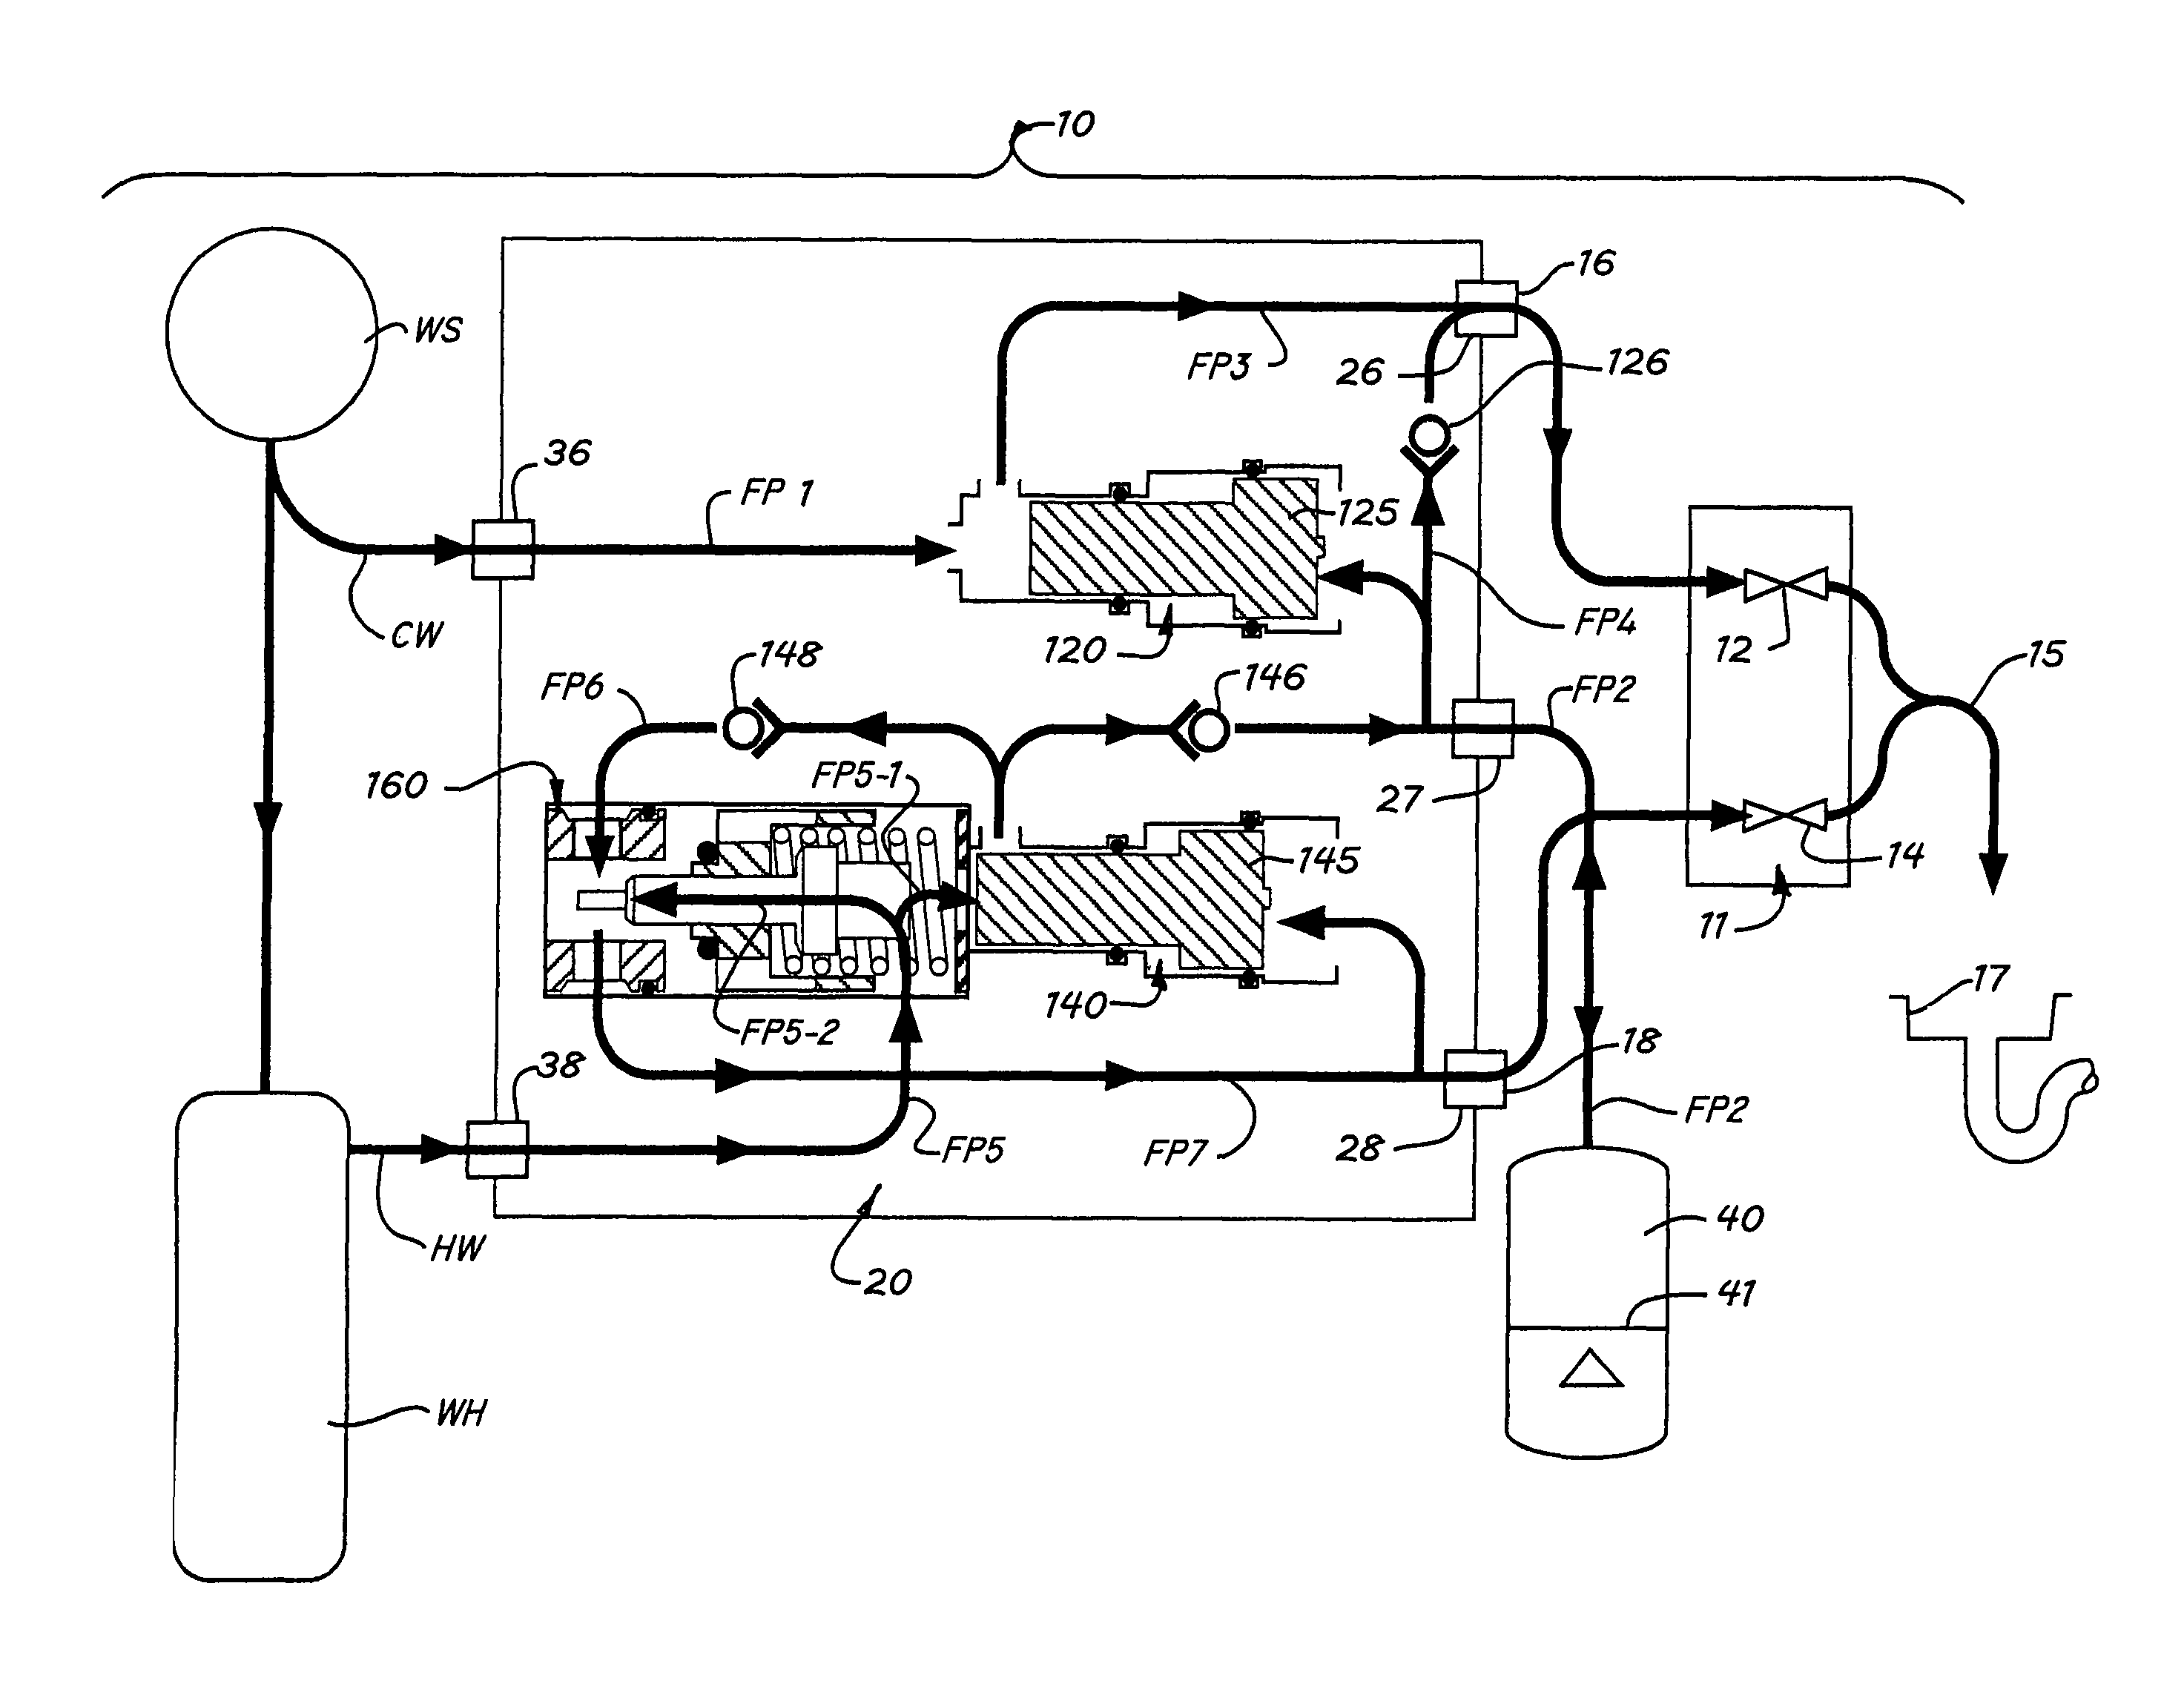 Method and apparatus for conserving water